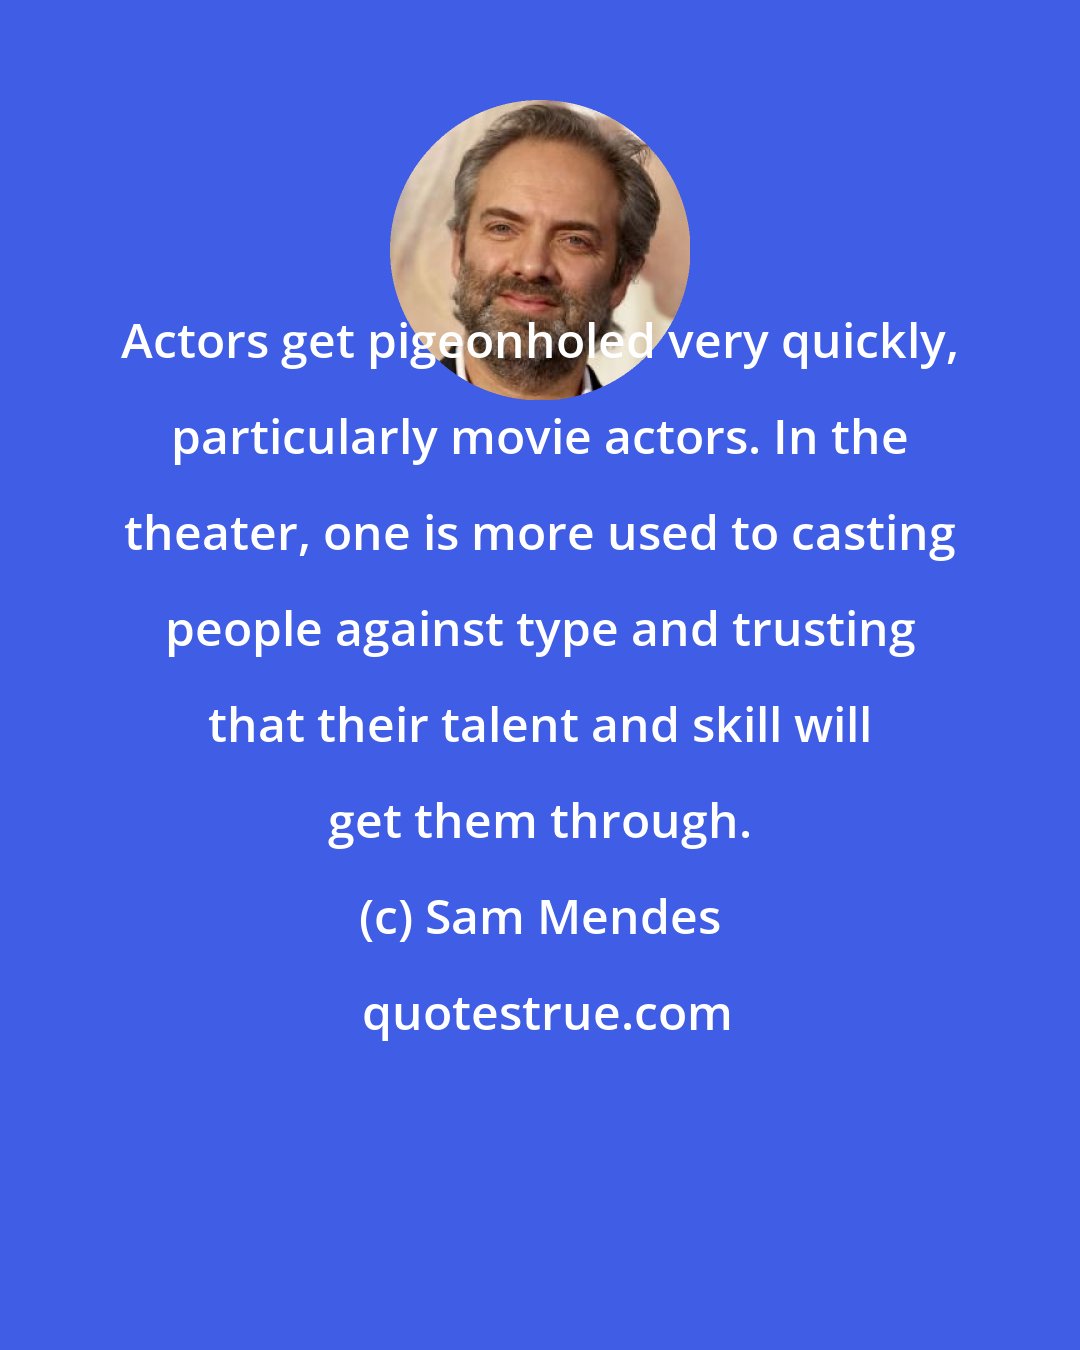 Sam Mendes: Actors get pigeonholed very quickly, particularly movie actors. In the theater, one is more used to casting people against type and trusting that their talent and skill will get them through.